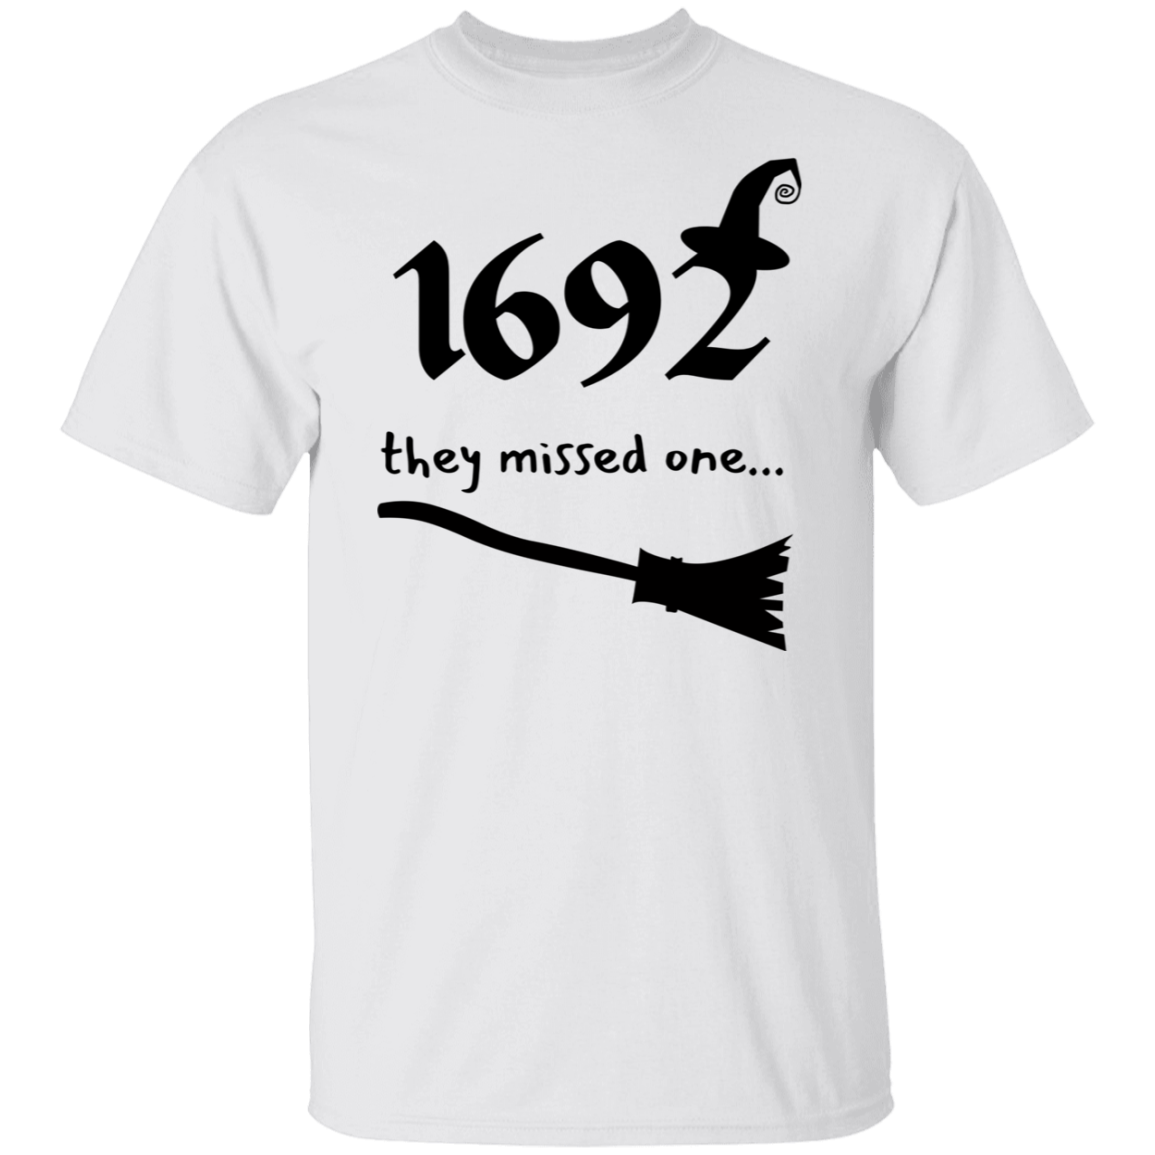 1692 they missed one.... T-shirt